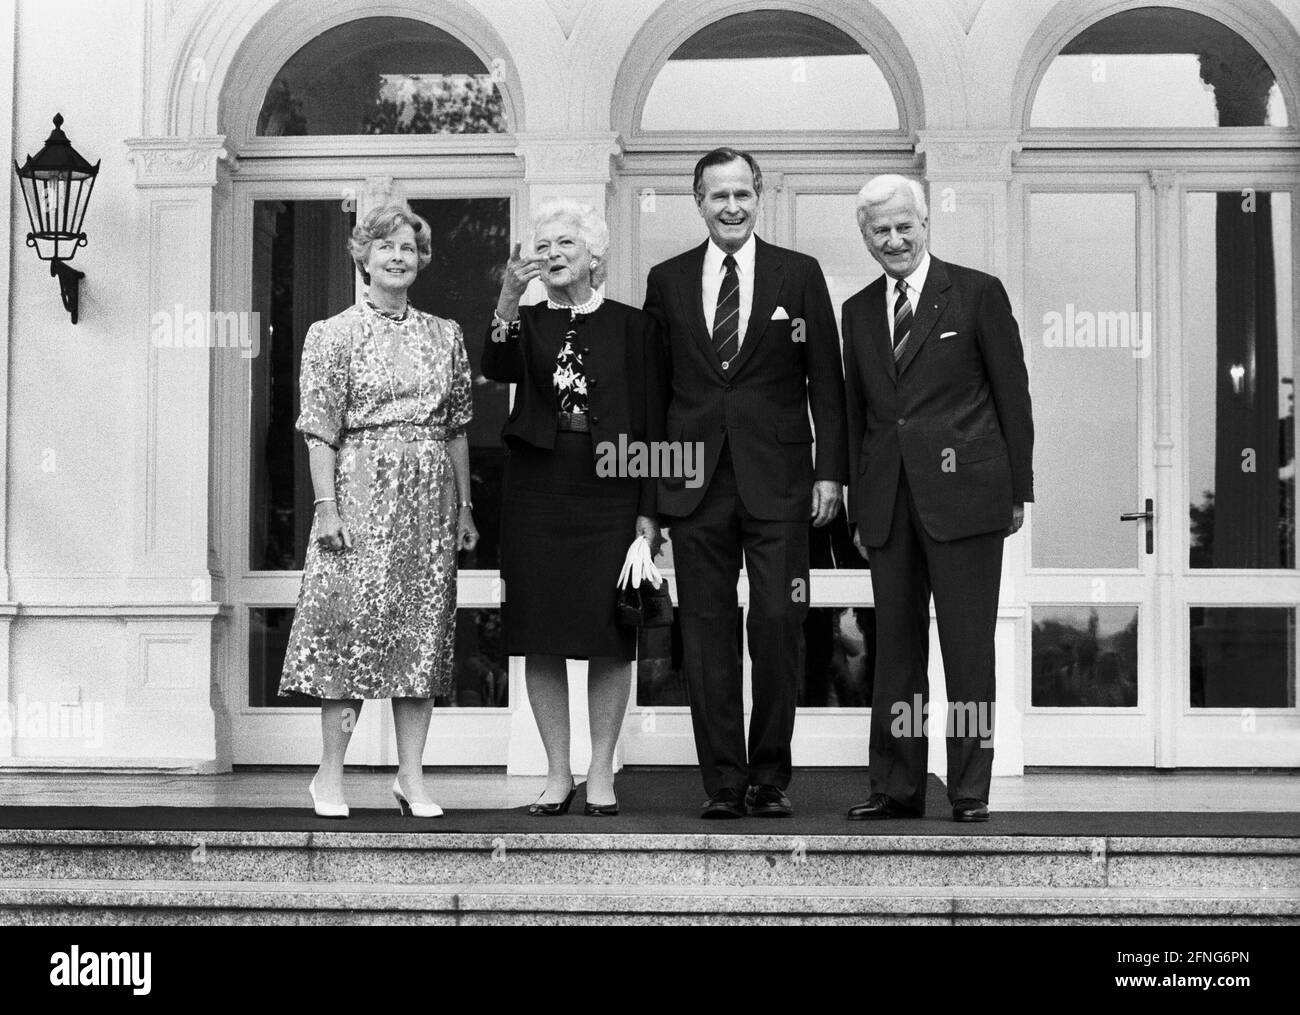 Germany, Bonn, 30.05.1989 Archive No.: 06-63-26 Visit of the American President Photo: from left to right: Marianne von Weizsäcker, Barbara Bush, George H. W. Bush and Federal President Richard von Weizsäcker [automated translation] Stock Photo